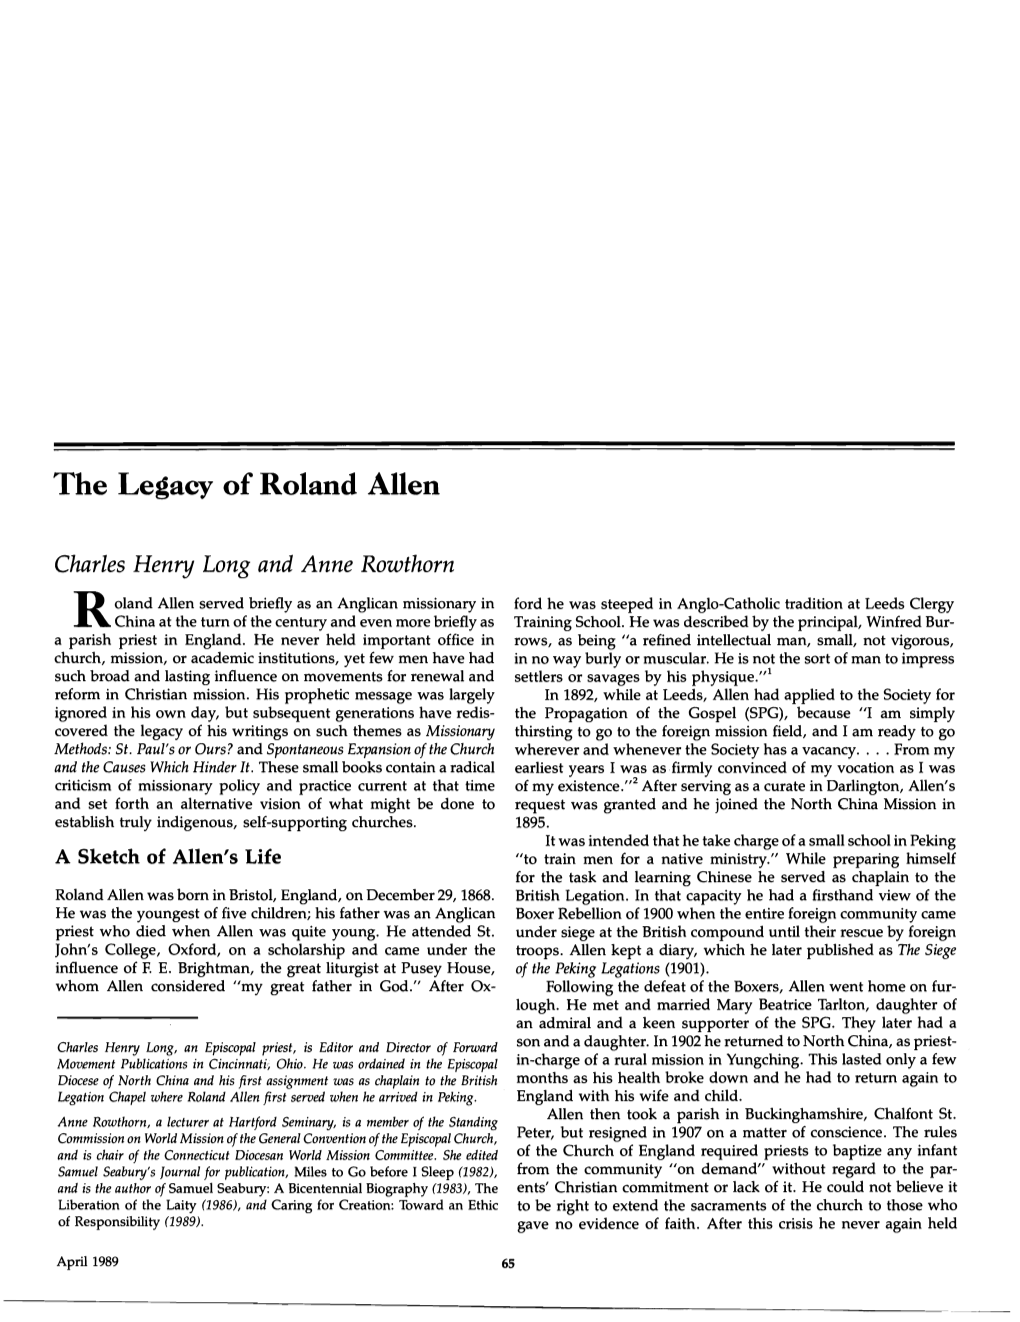 The Legacy of Roland Allen